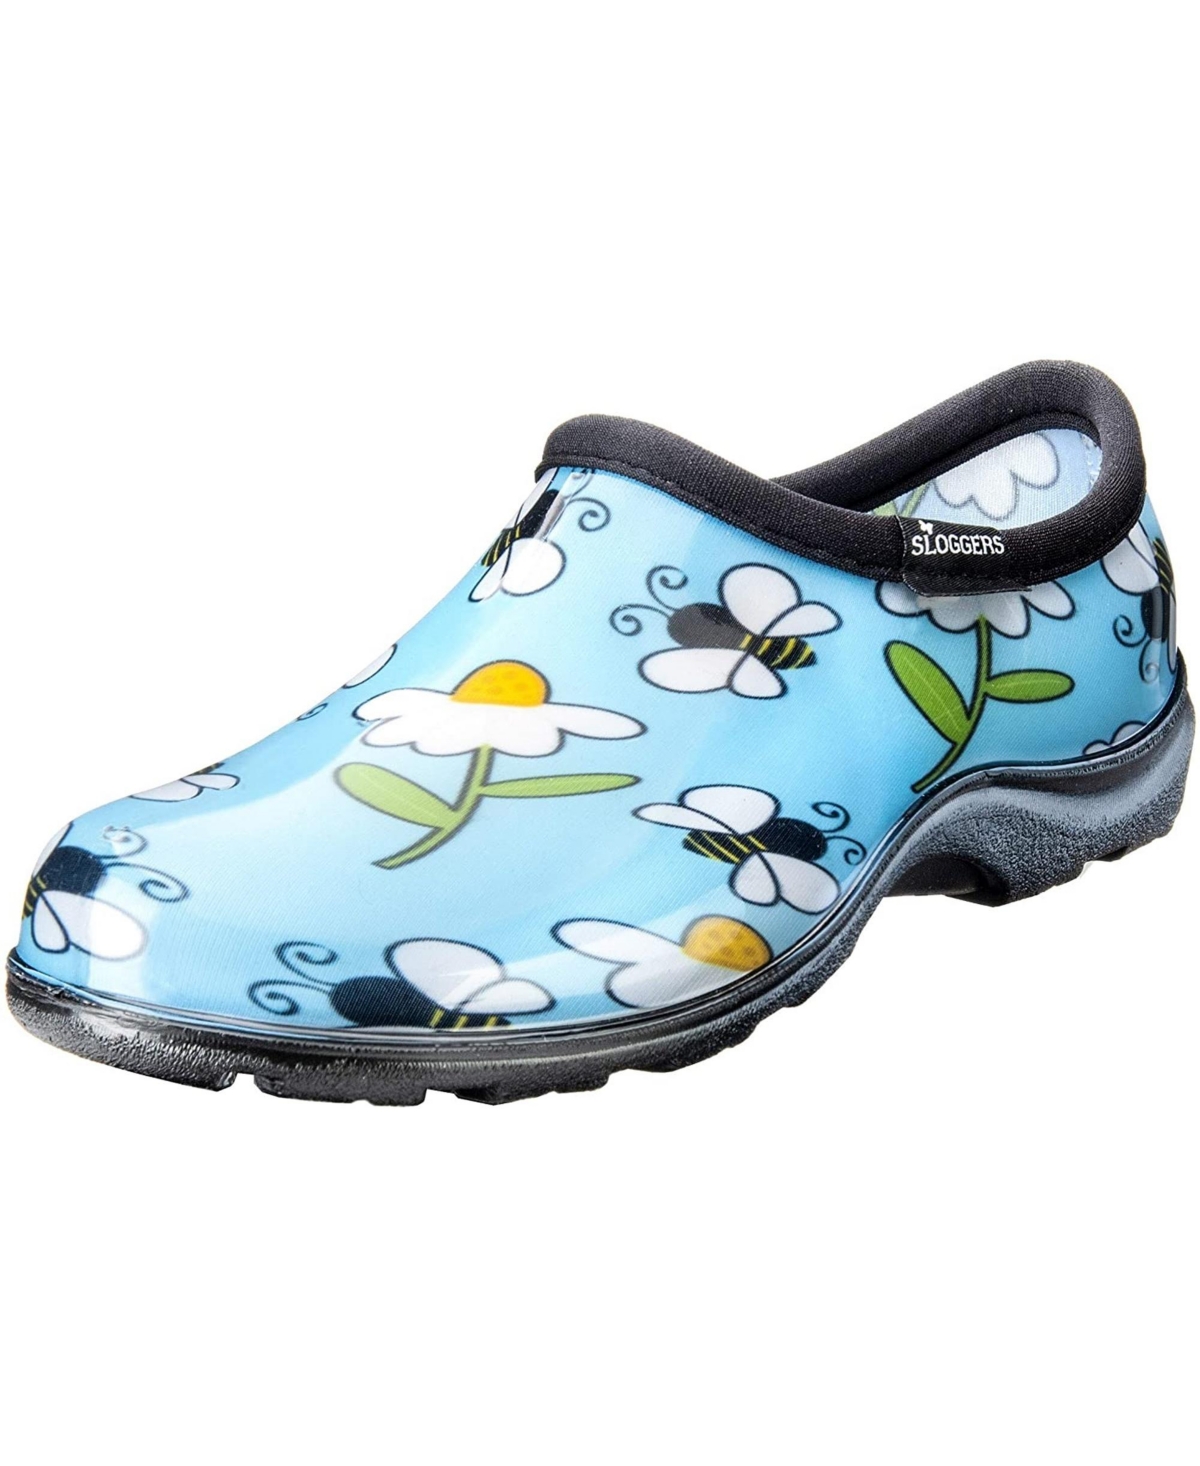 Womens Waterproof Comfort Shoes, Blue Bees Print, Size 6 - Multi